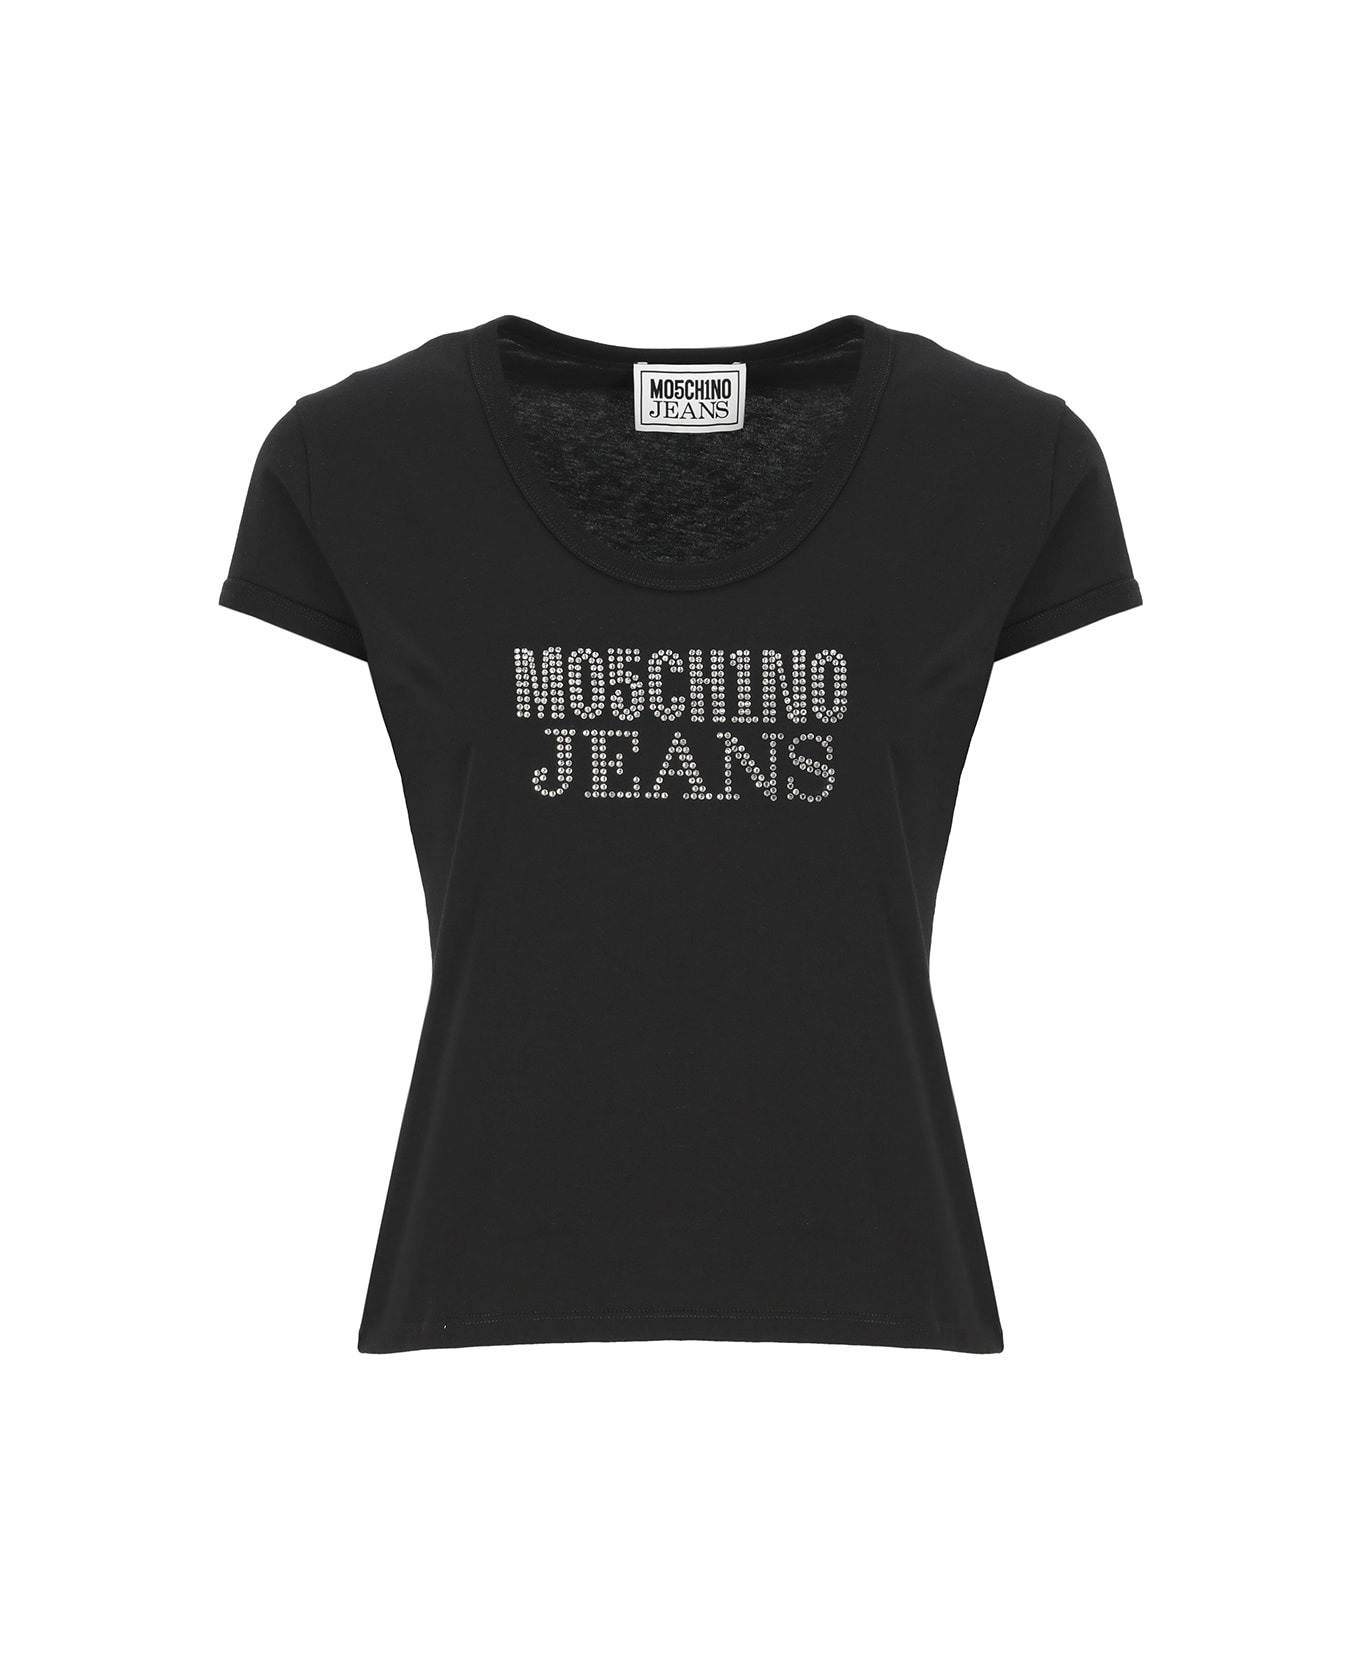 M05CH1N0 Jeans T-shirt With Logo - Black